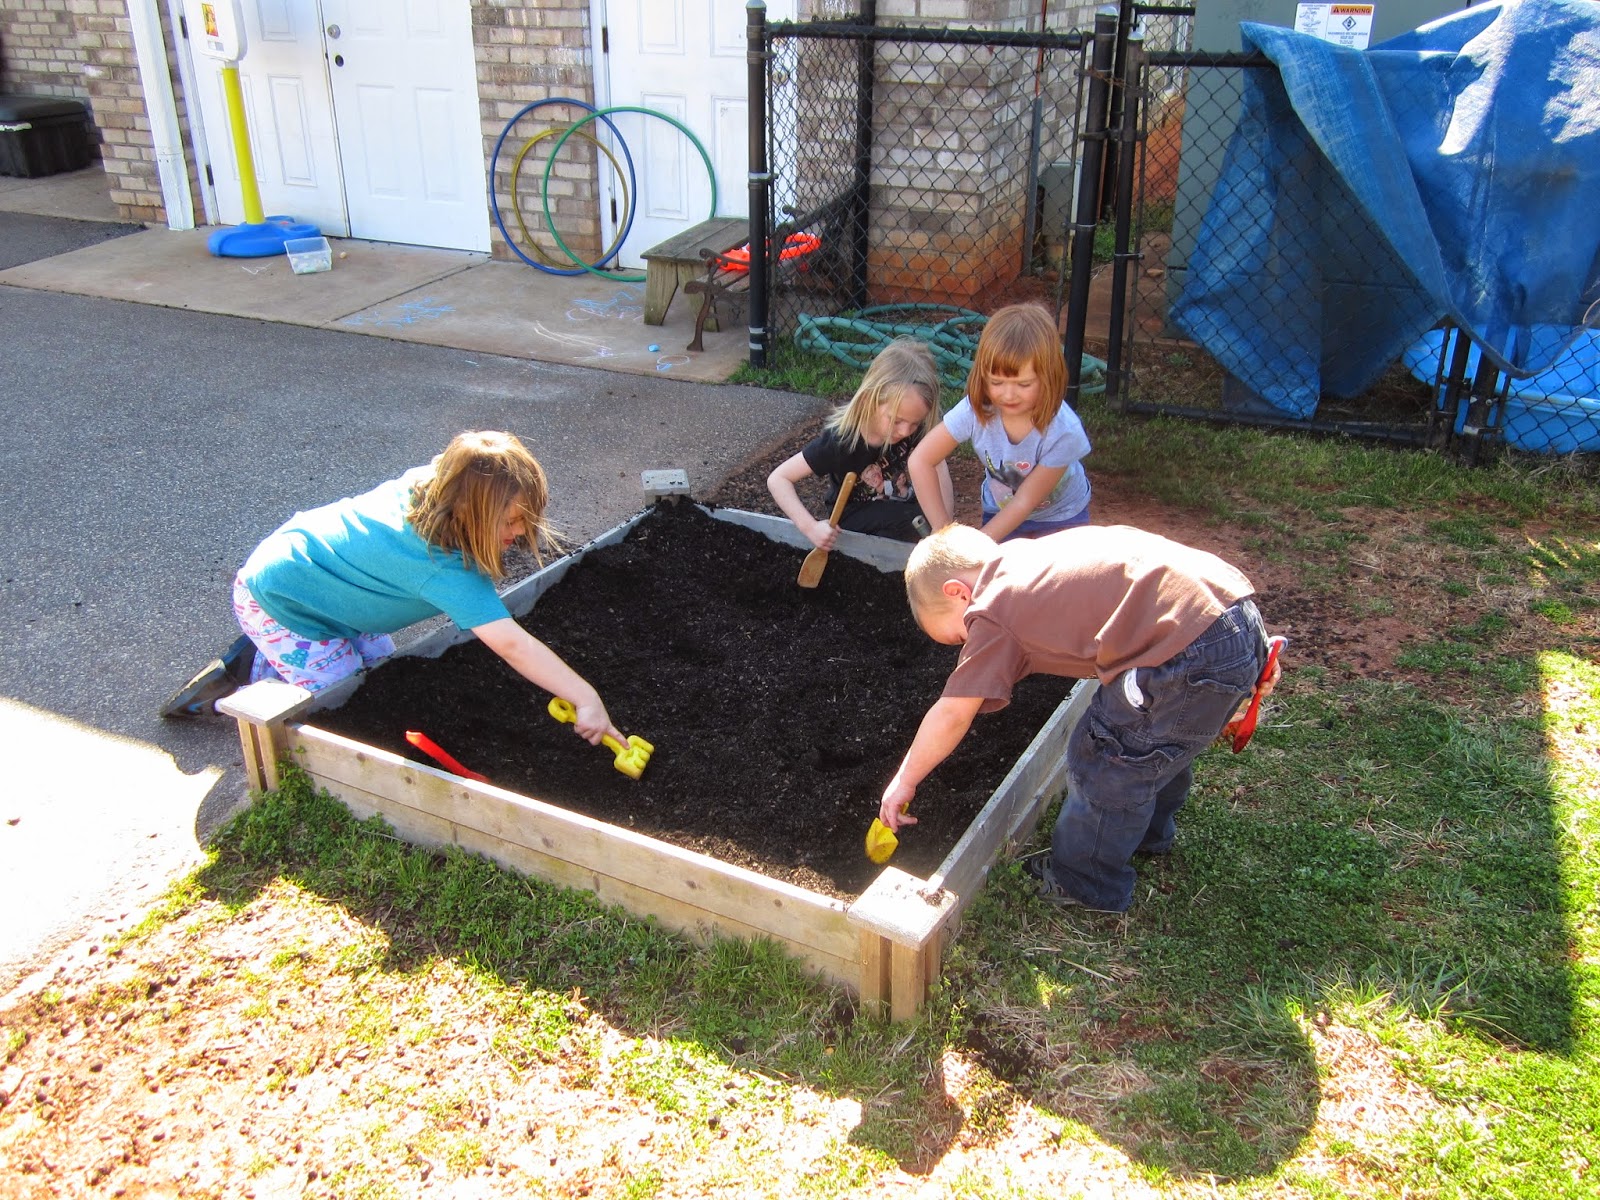 The Pa-Paw Patch, vale nc childcare